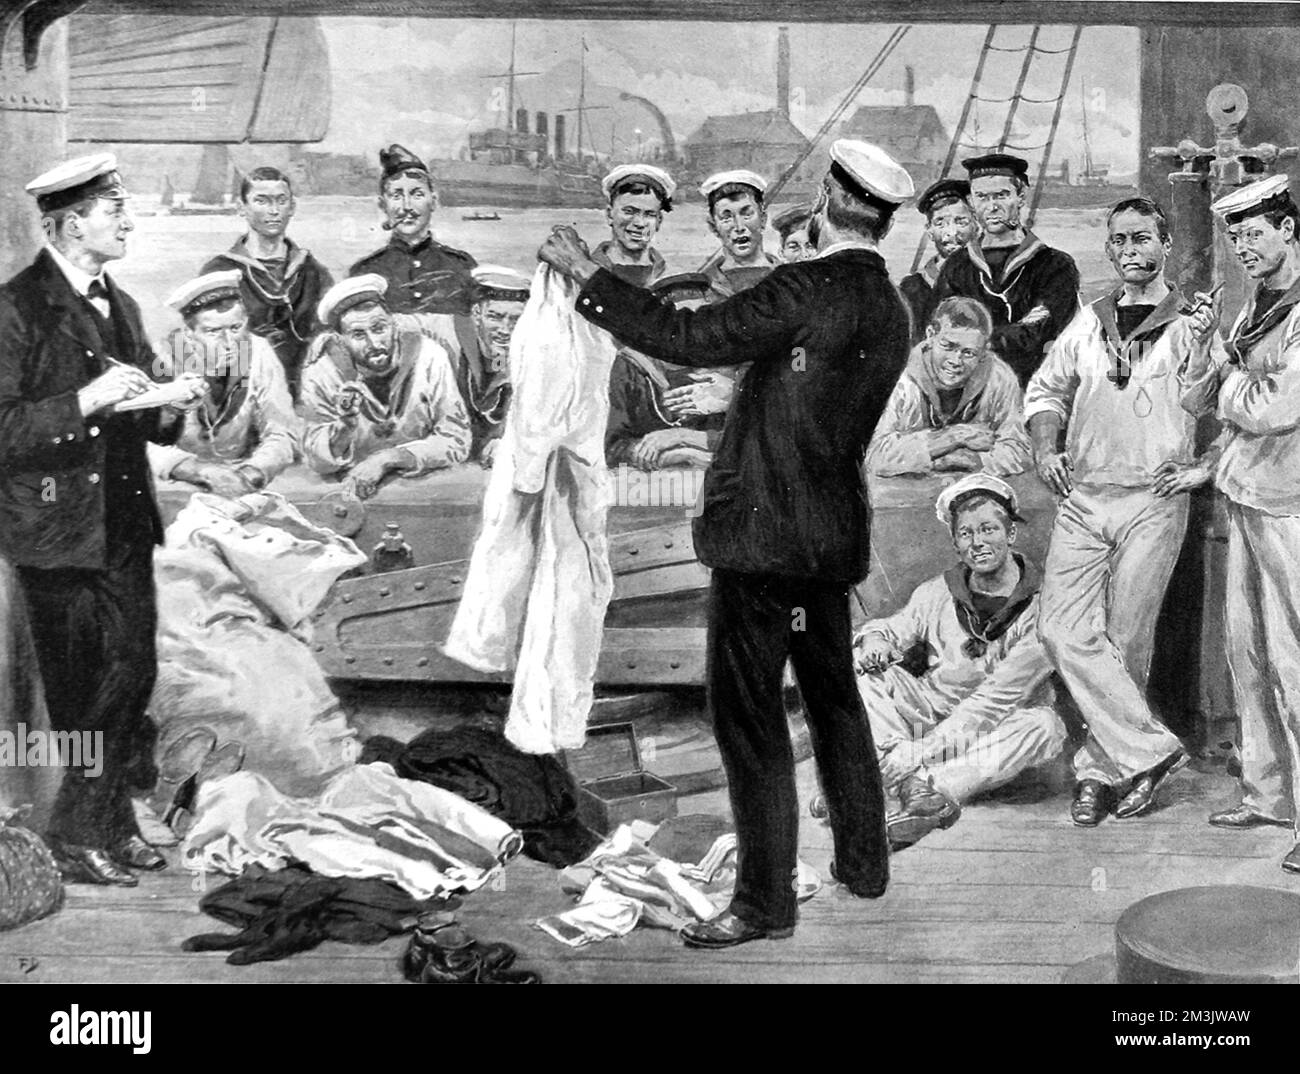 Sale of the belongings of a deserter, on board a British battleship. This rare event was held whenever a seaman deserted and left belongings on board a ship. The Ship's Corporal, or Master-at-Arms, (with his back to us) is acting as auctioneer, with another officer taking a record. The proceeds from this kind of sale were forfeited to the Crown.     Date: 1906 Stock Photo